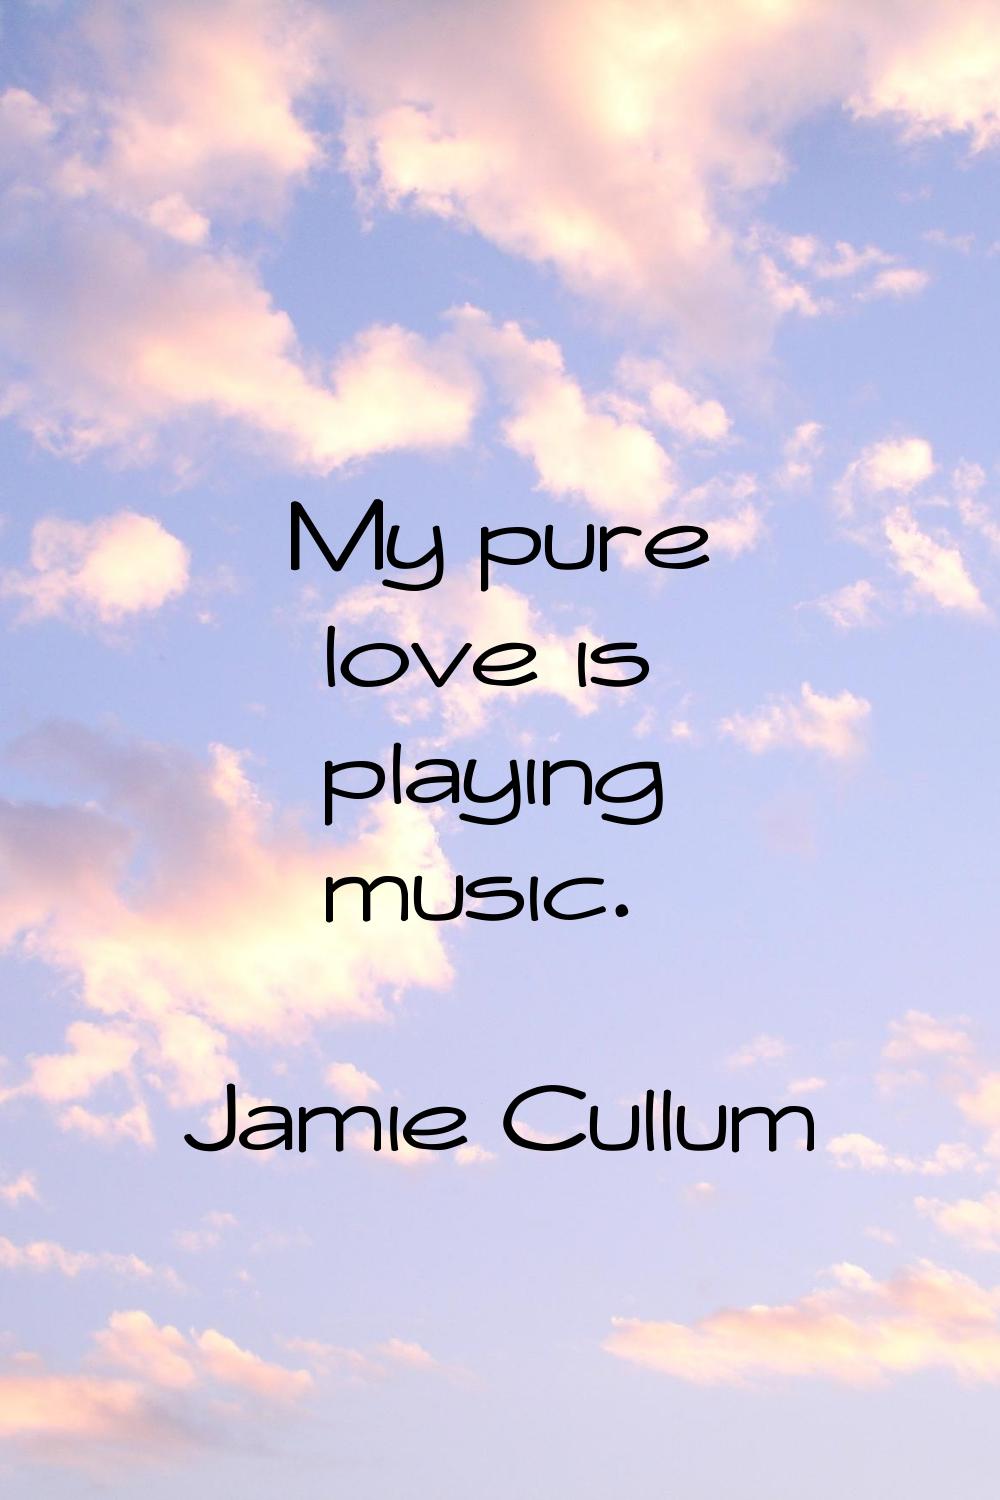 My pure love is playing music.